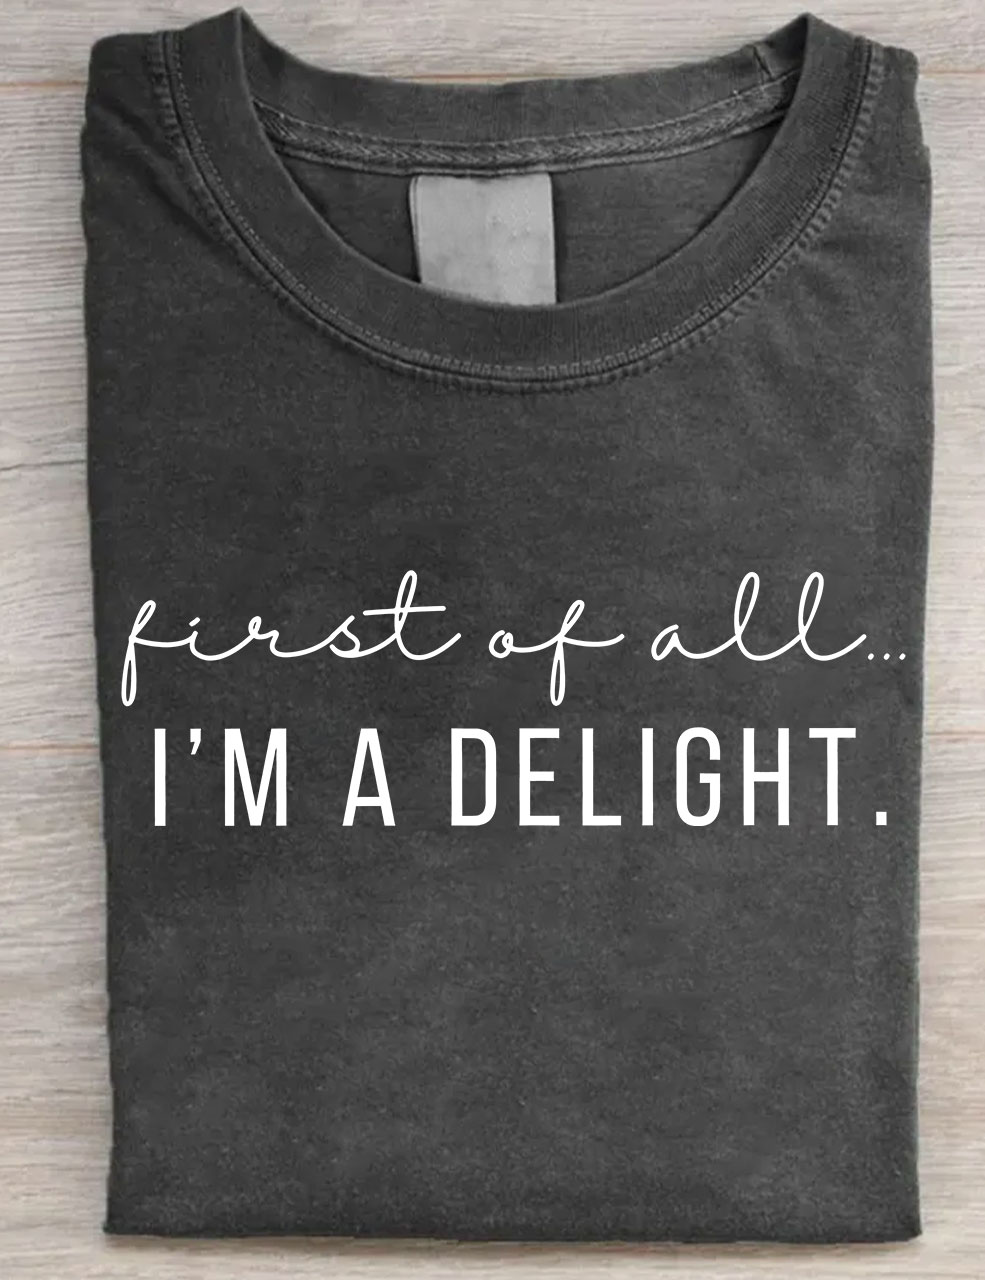 First Of All I'm A Delight T-shirt